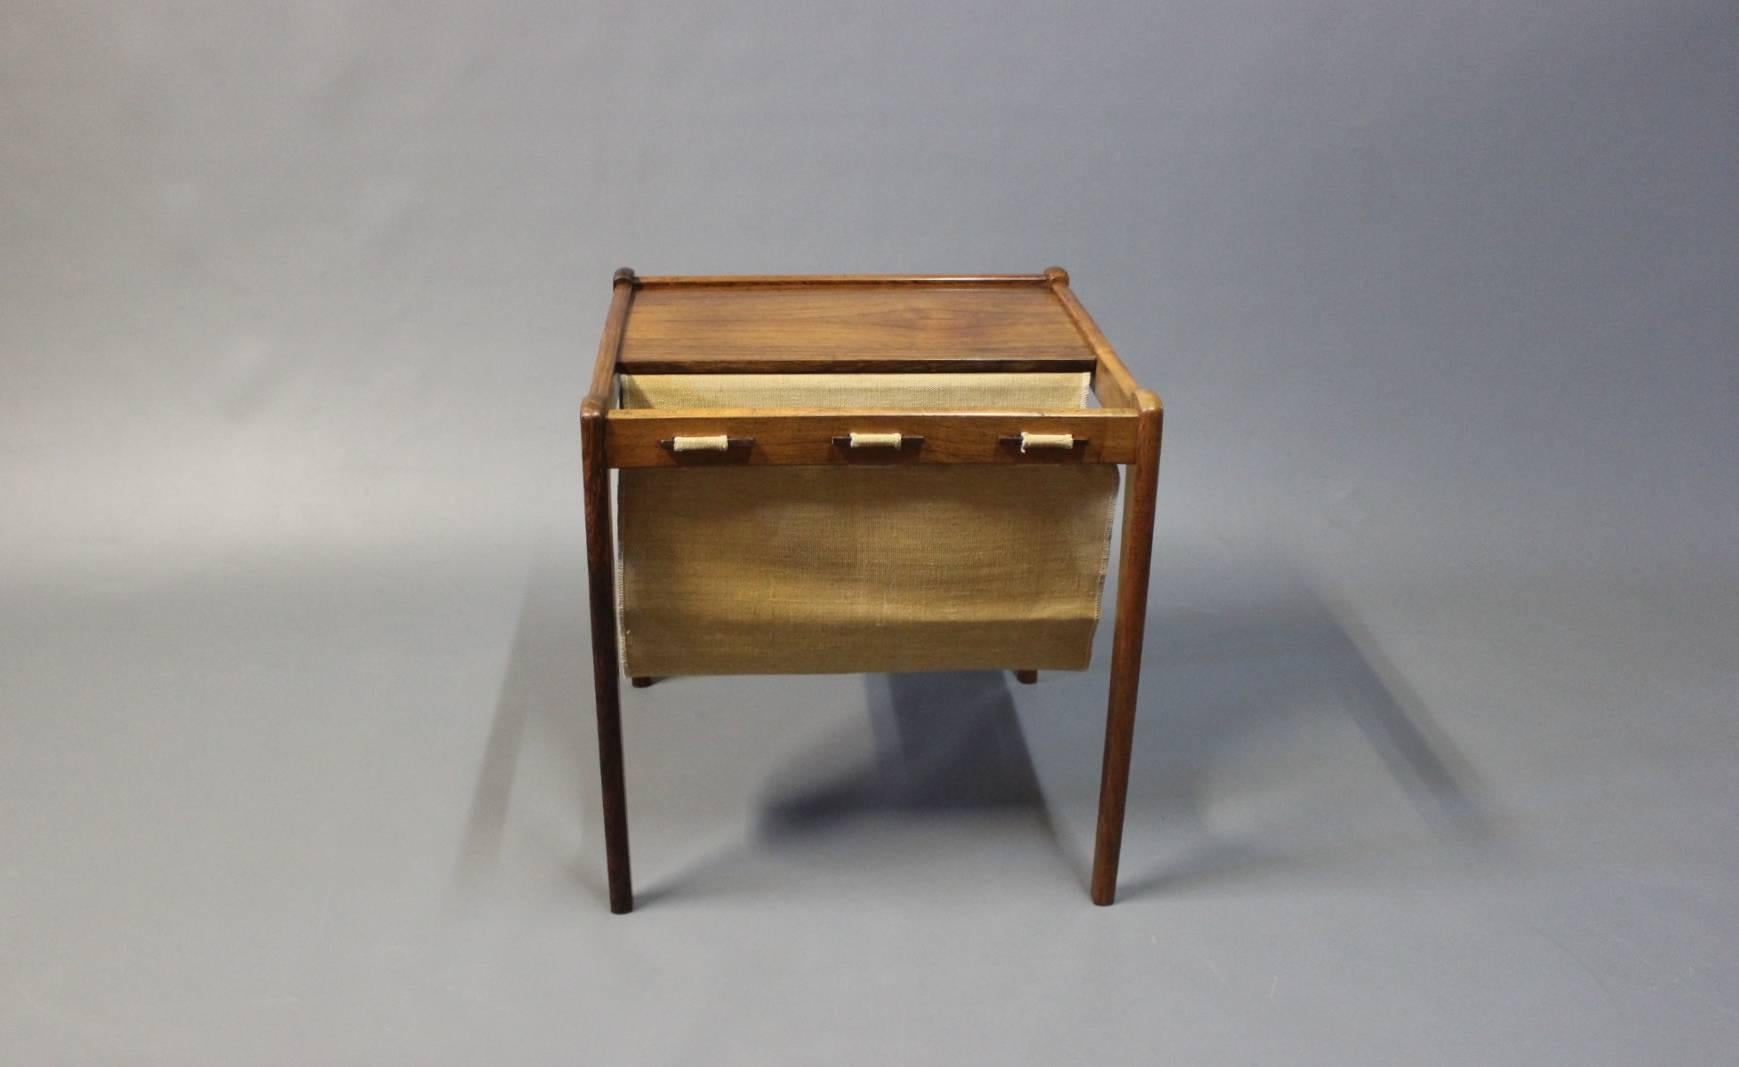 Small newspaper holder and/or lamp table in rosewood. The table is of Danish design from the 1960s made by an unknown Danish cabinetmaker.